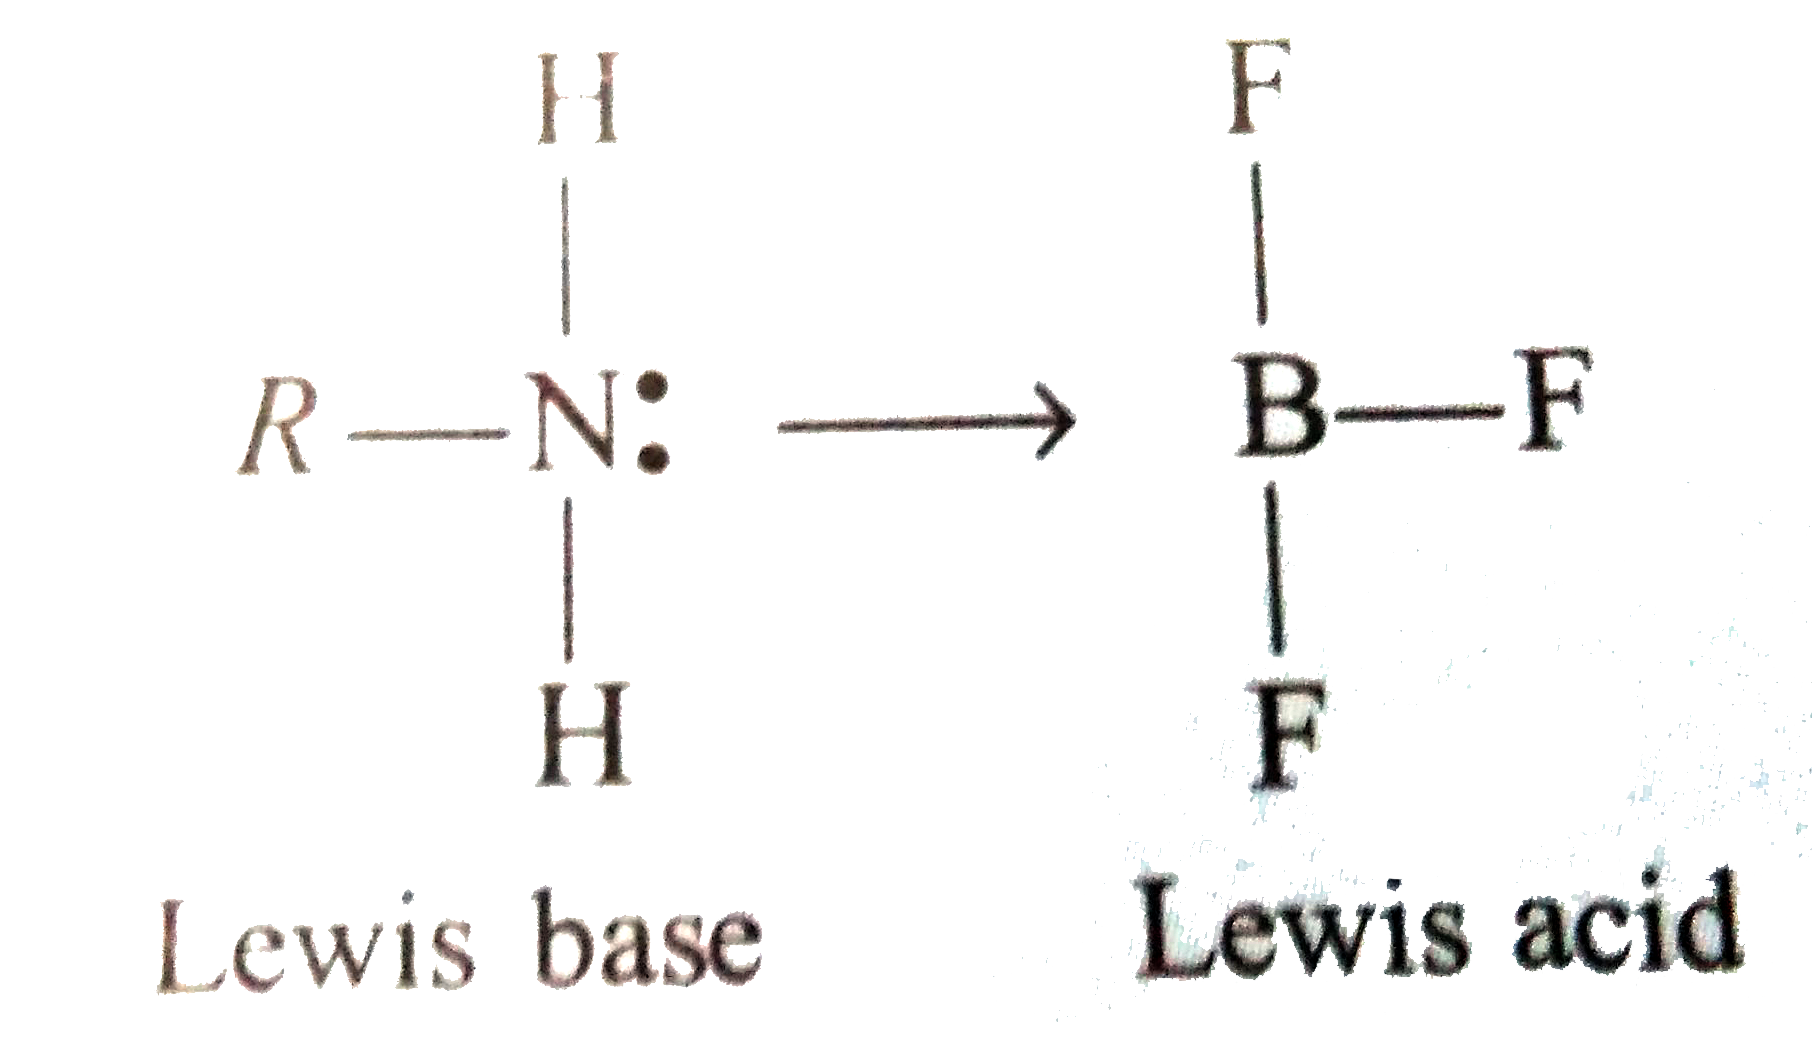 Amines are basic compounds They act as Lewis base due to the presence of lone pair electrons at nitrogen      Amines aho behave as base as well as Bronsted inductive effect, steric hindrance and resosnance.   CH(3)-NH(2)+HOH hArr CH(3)-NH(3)^(+)+OH^(-)   CH(3)-NH(2)+H^(+)Cl^(-)hArr CH(3)-NH(3)^(+)+Cl^(-)    Alkyl groups and electron groups hence these groups  increases the electron density at nitrogen as well as the basic amines character of amines. Basic character of teritary amines is reduced due to the steric hindrance of three alkyl groups. Experimentally it is observed that stronger bases have smaller values of pK(b) greater value of K(b).   Which of the following is the most basic?